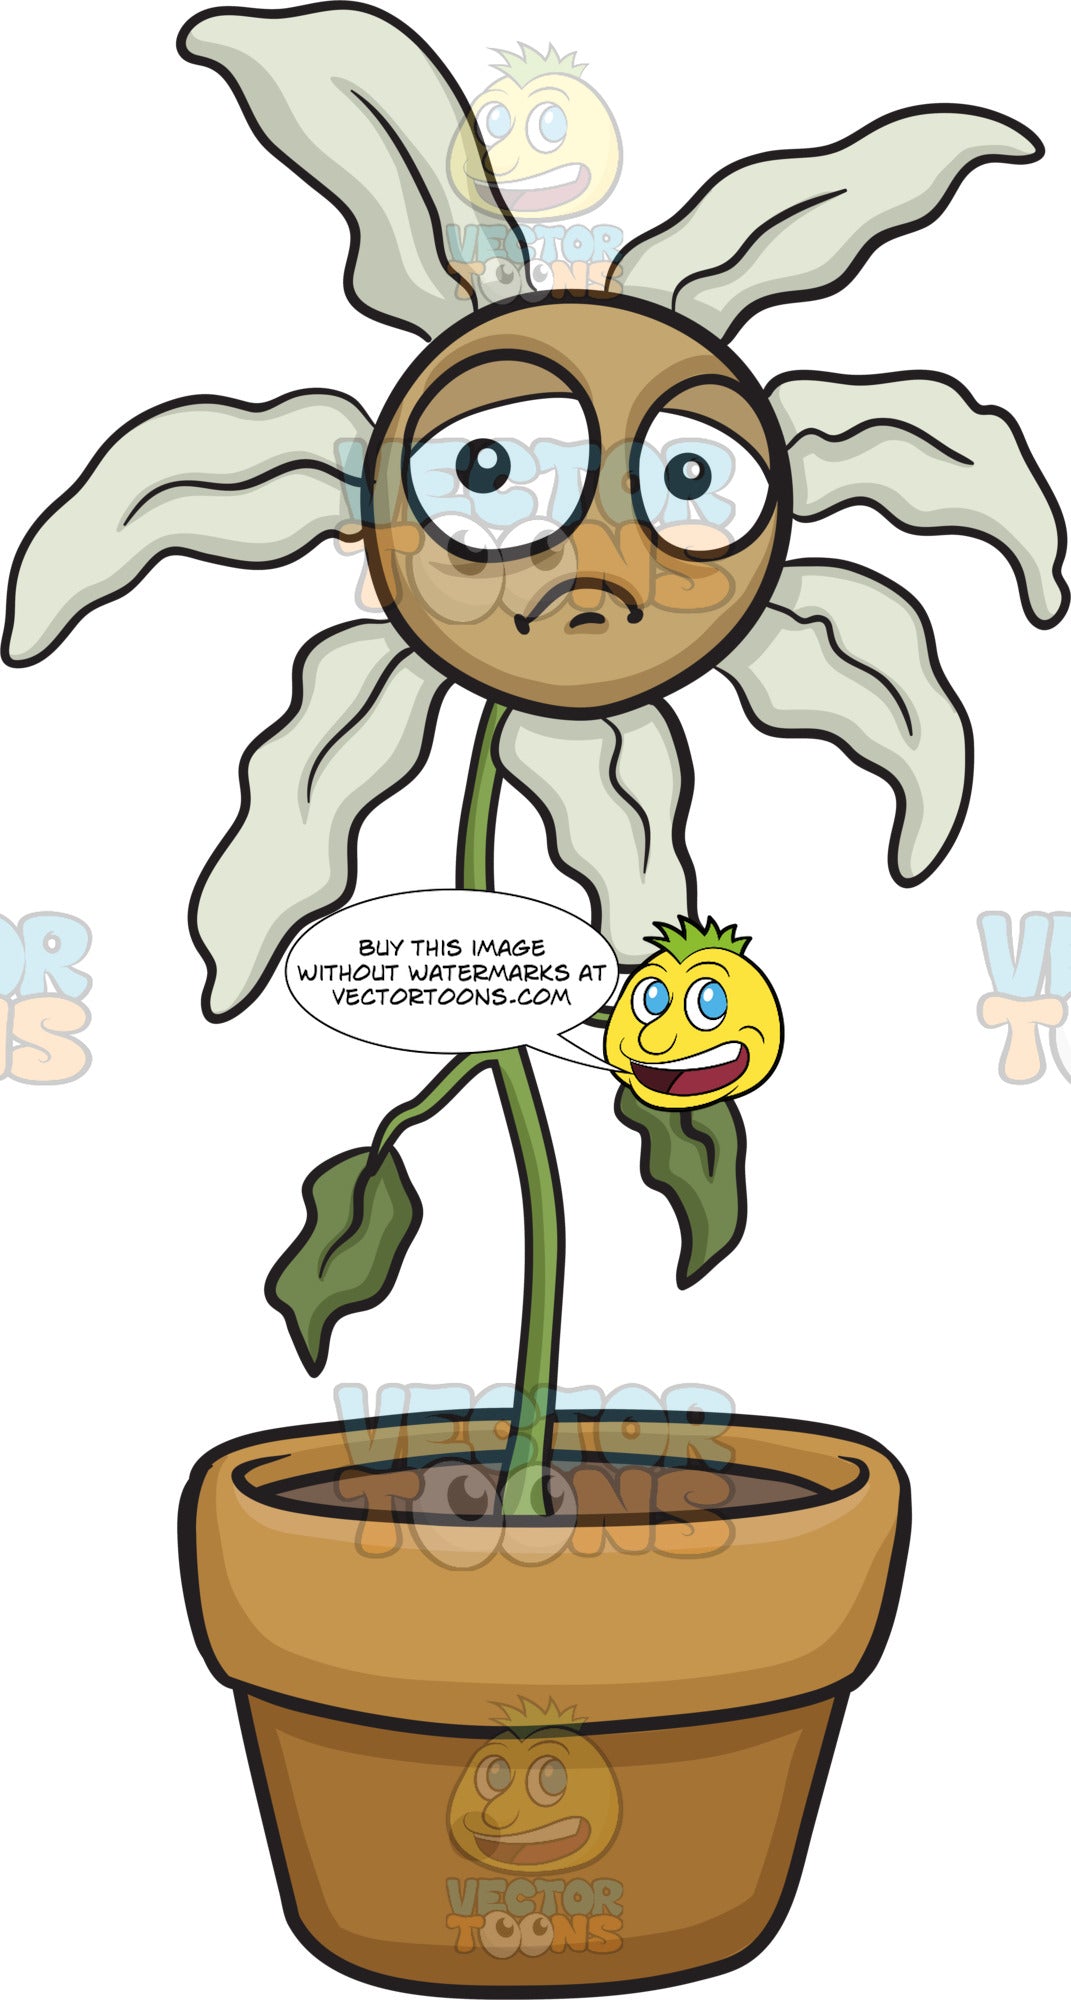 A withering flower  Clipart Cartoons  By VectorToons